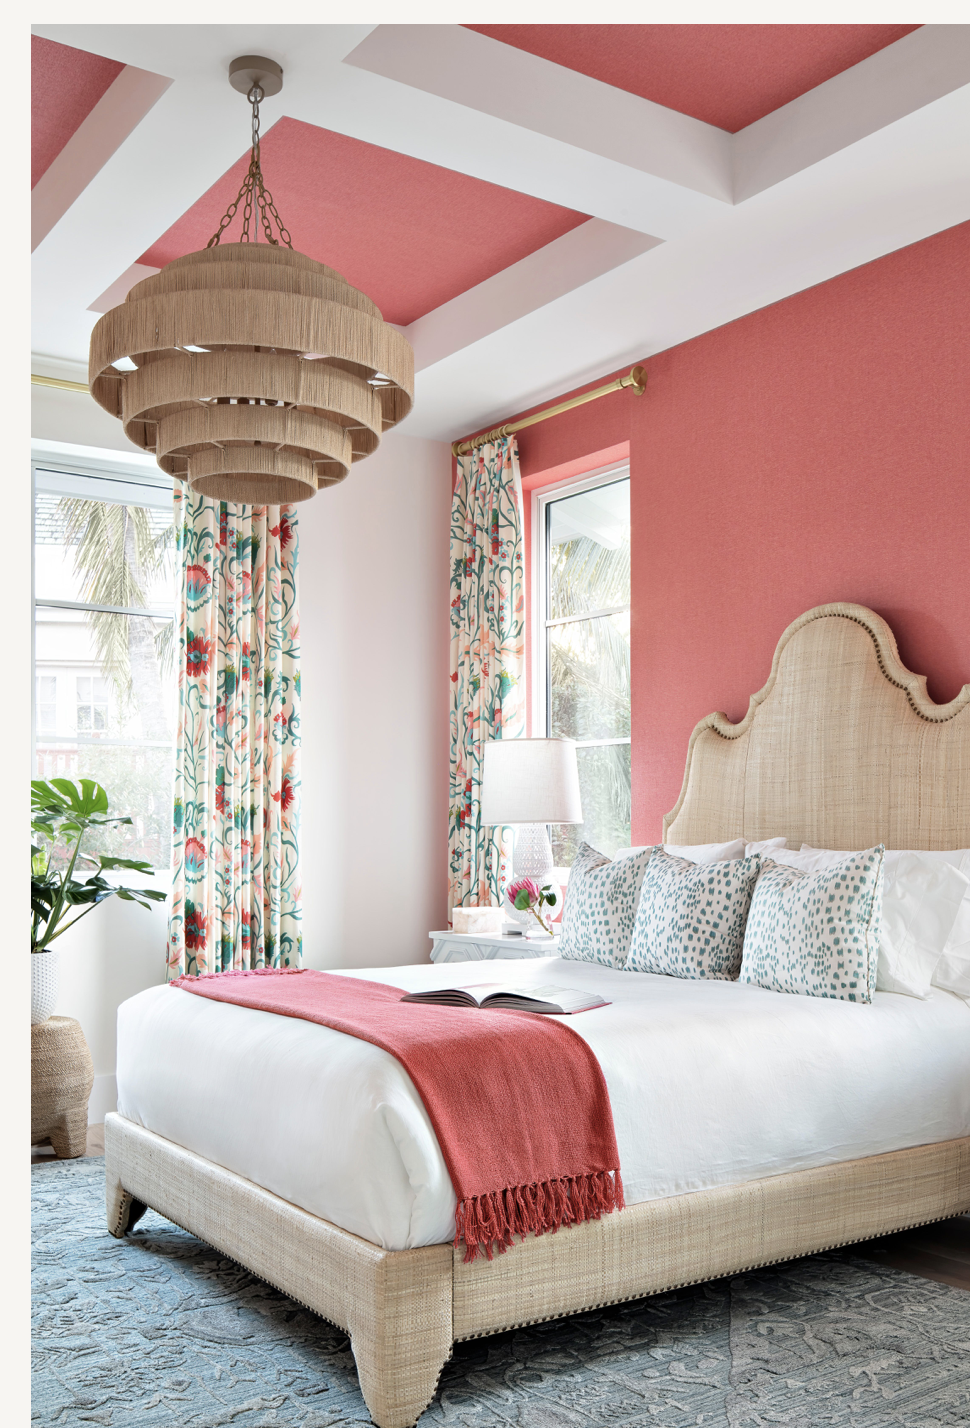 
While many of the rooms incorporate whites, blues, and grays, this bedroom’s deep coral hues bring in the warmth and vibrancy of the tropics.  

